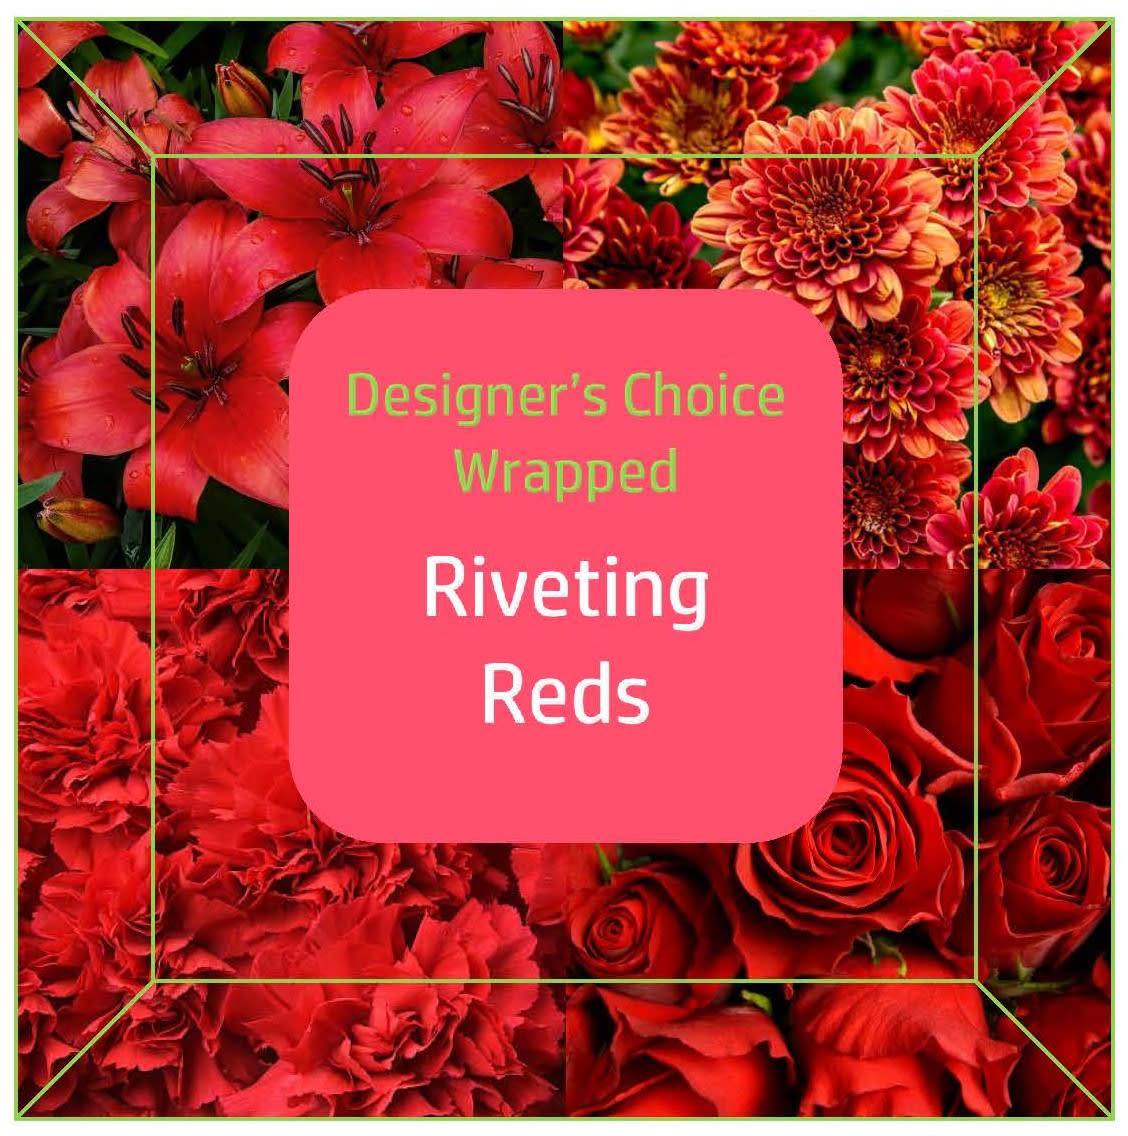 Designer's Choice (Wrapped) Riveting Reds - Rivet them with rich red blooms in a made-on-the-spot wrapped floral bouquet! Our expert designer will hand-select the freshest of our seasonal flowers and design them into a beautiful wrapped bouquet, all tied together with a lovely bow! (NO VASE) Sizes and colors will vary. If you like a certain color more than another or you want us to avoid any type of flower, please leave a note in the special instructions.